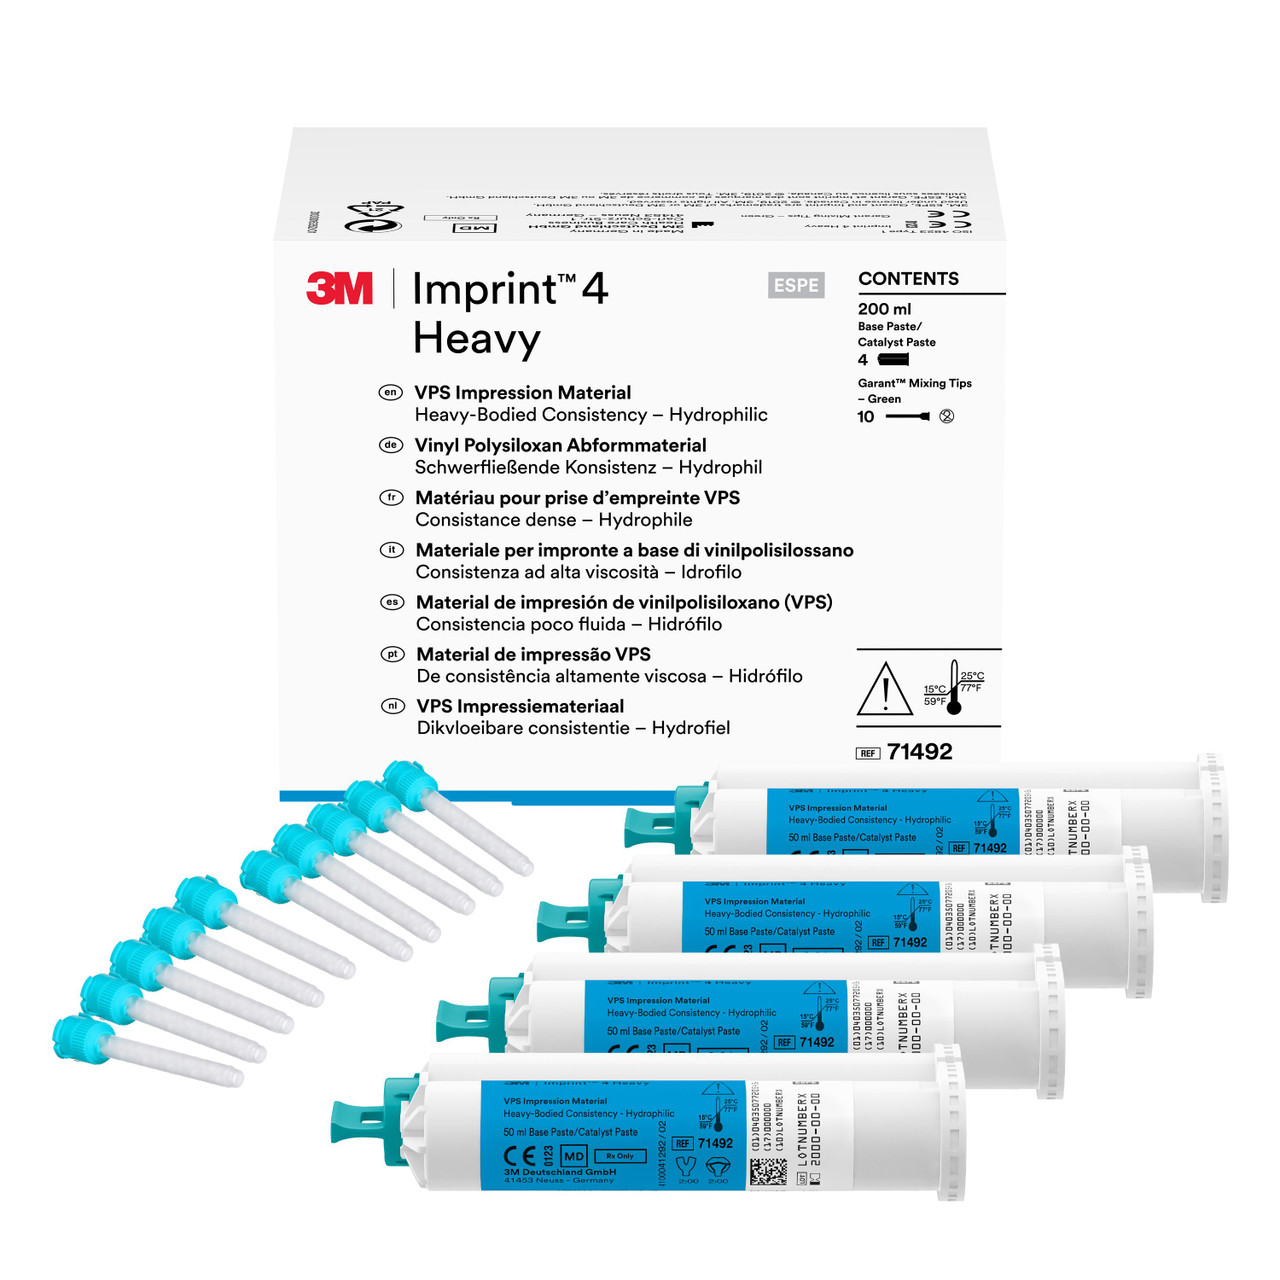 3M Imprint 4 Heavy VPS Impression Material Refill, 71492